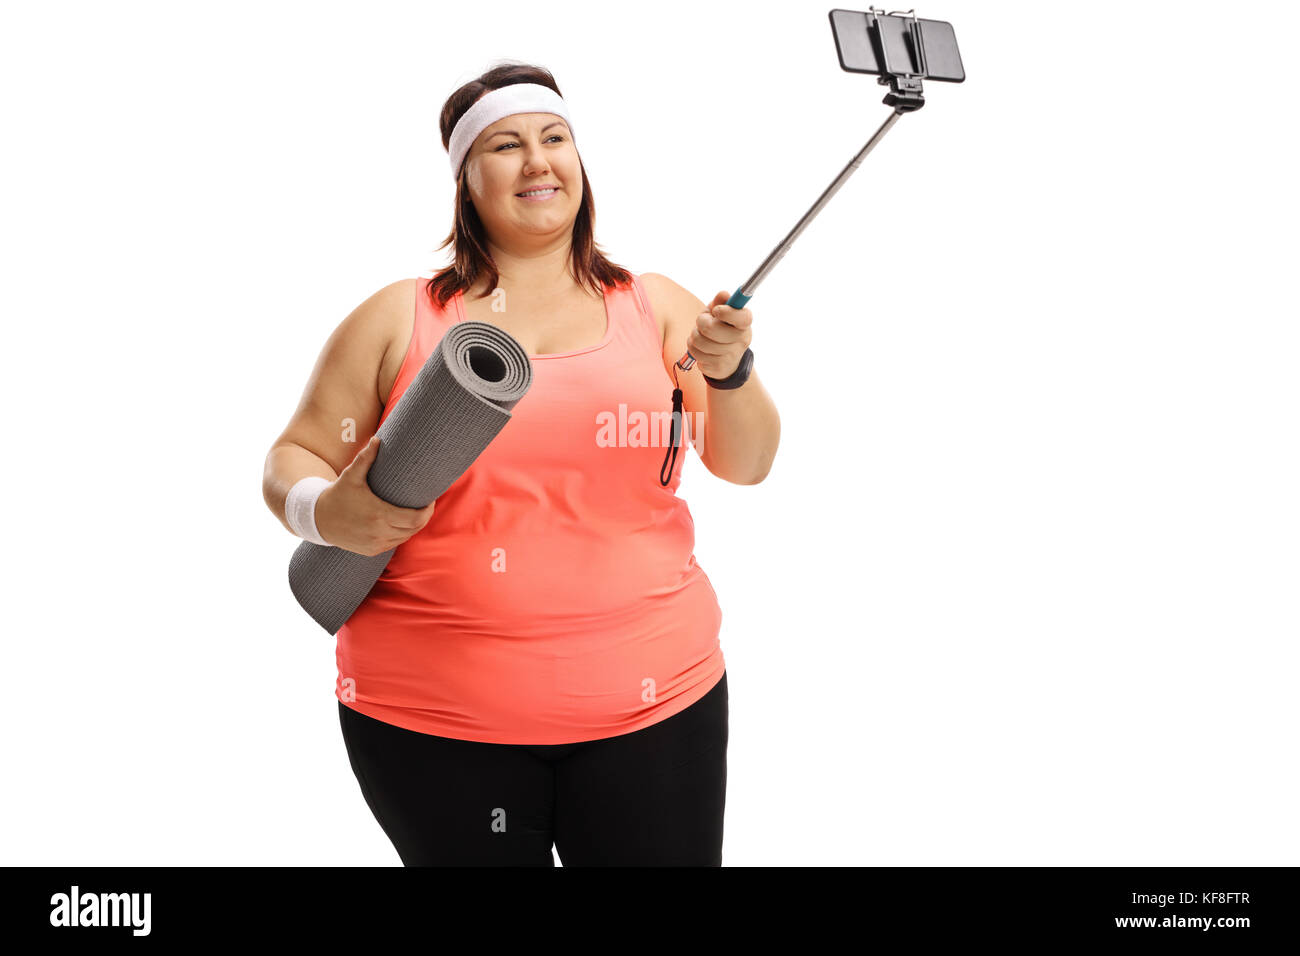 Overweight woman holding an exercise mat and taking a selfie with a stick isolated on white background Stock Photo